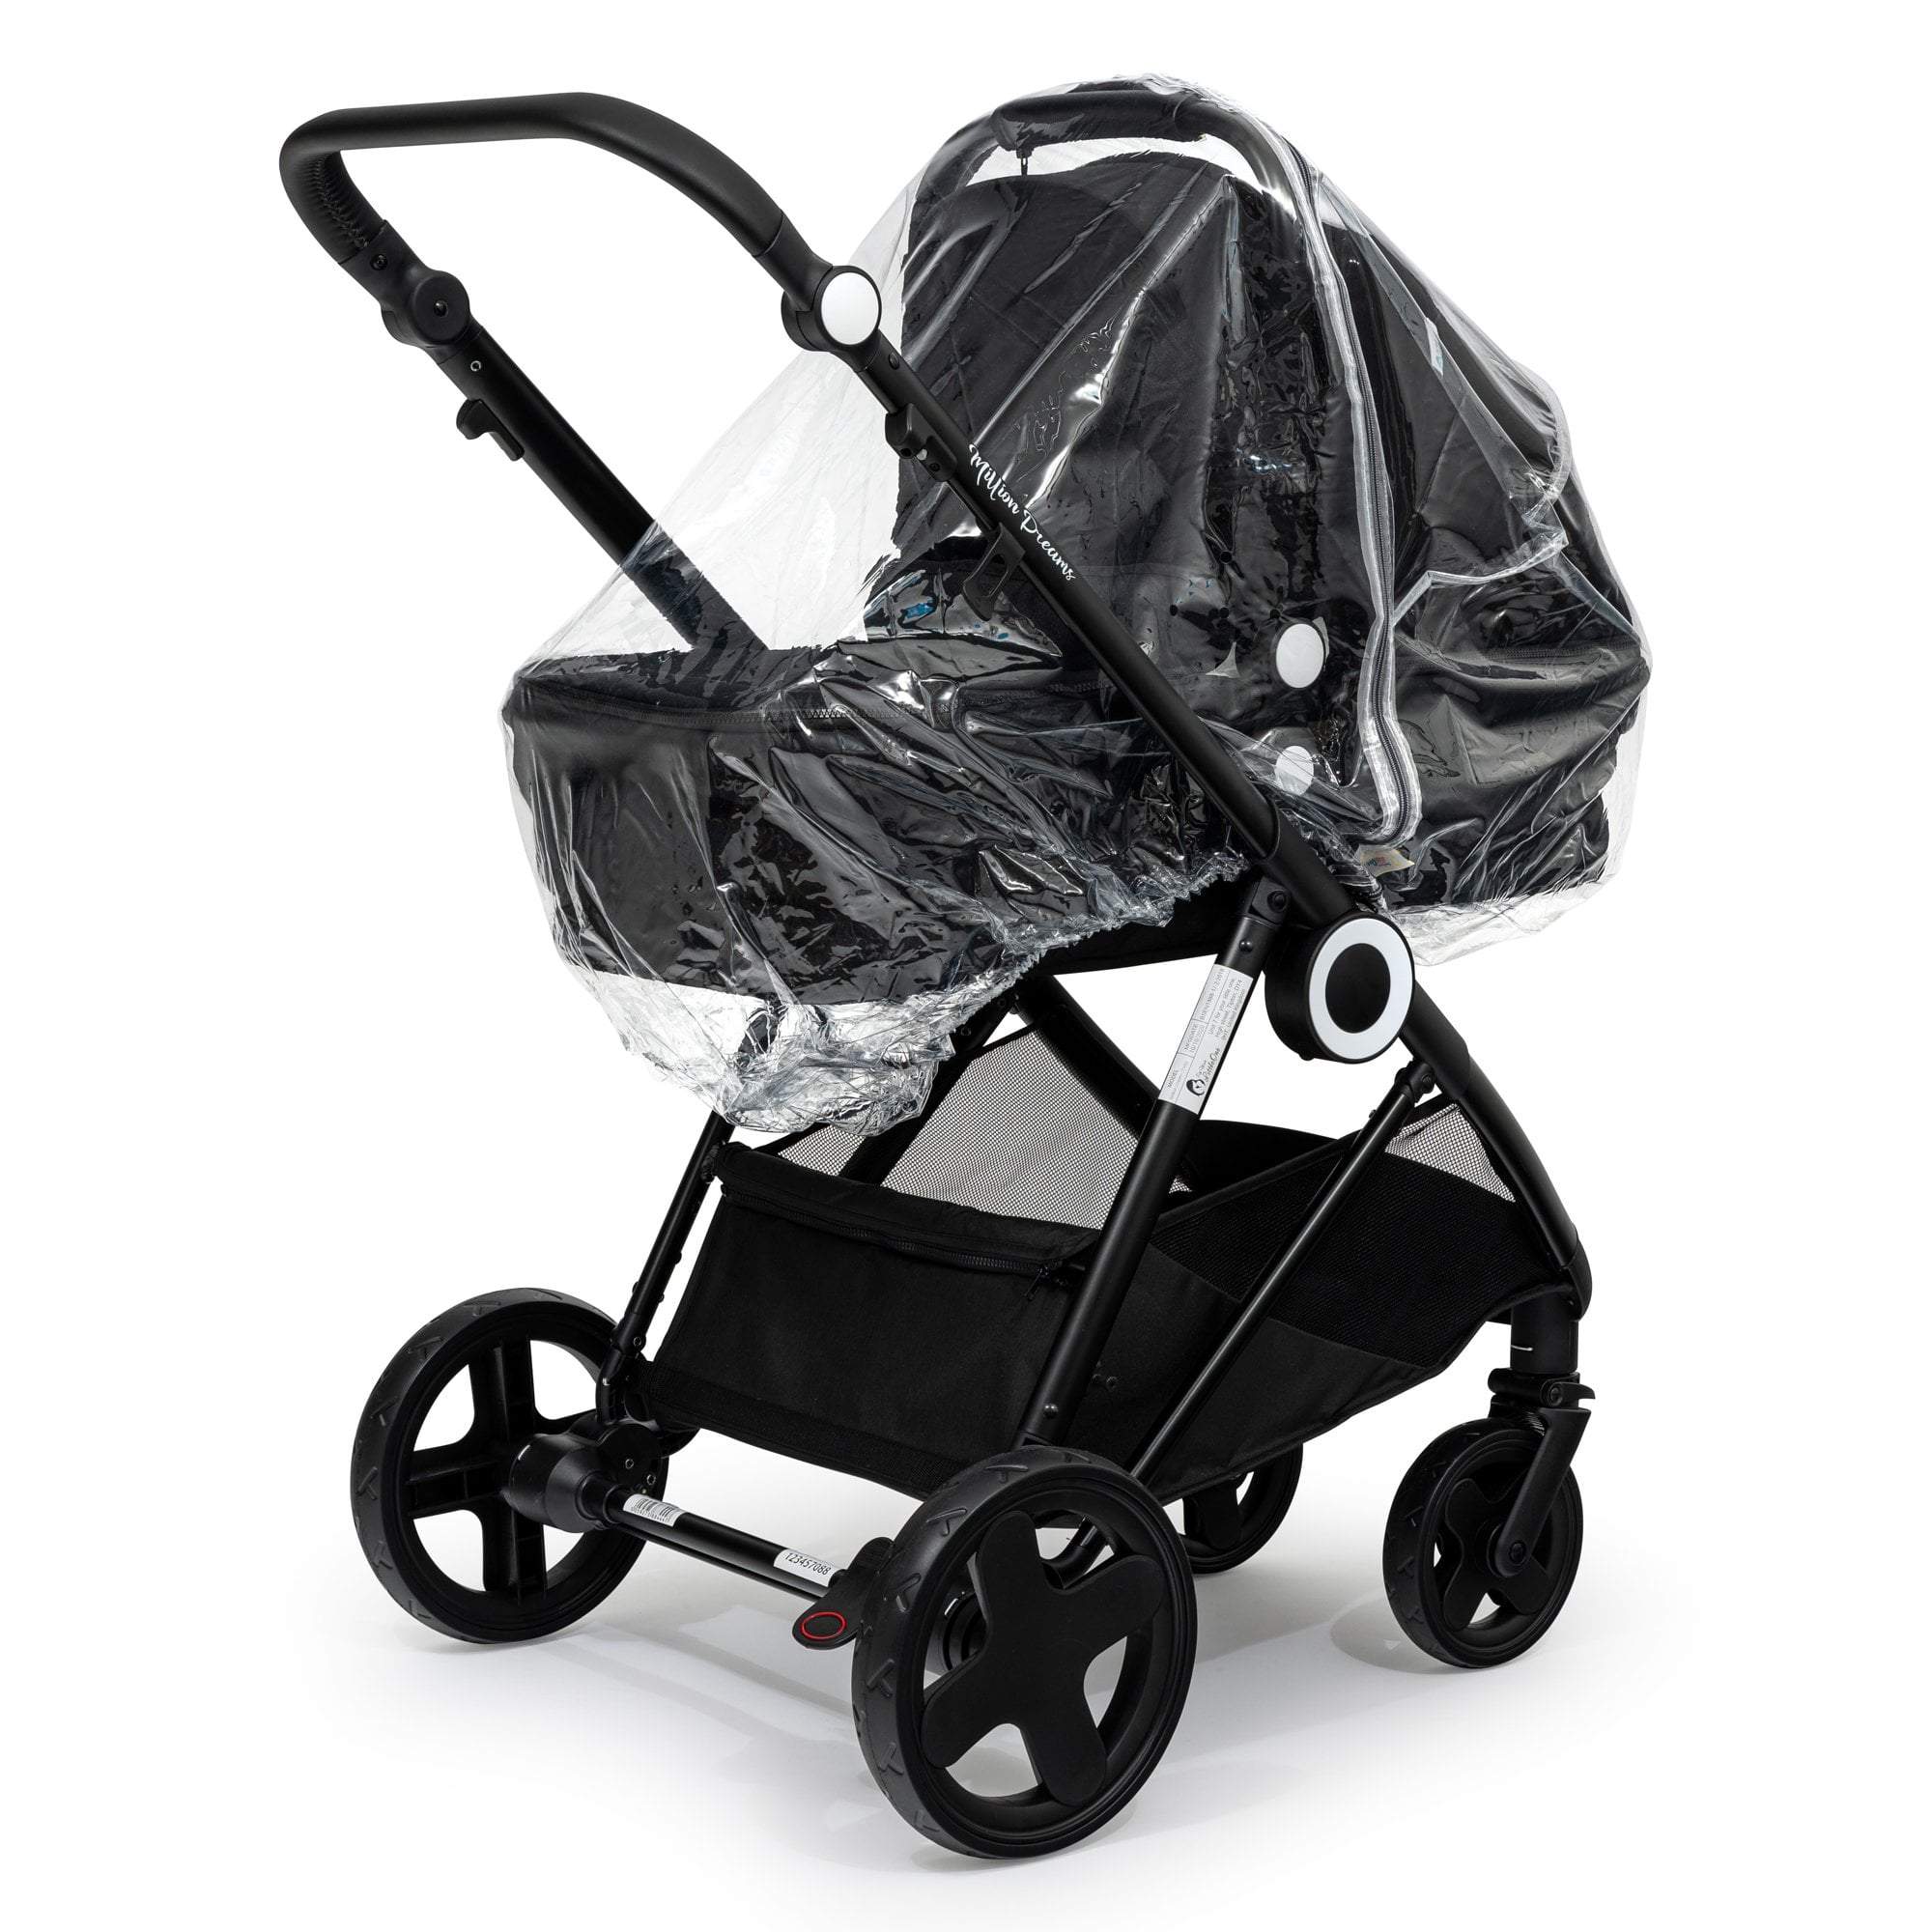 Carrycot Raincover Compatible With Nuna - Fits All Models - For Your Little One